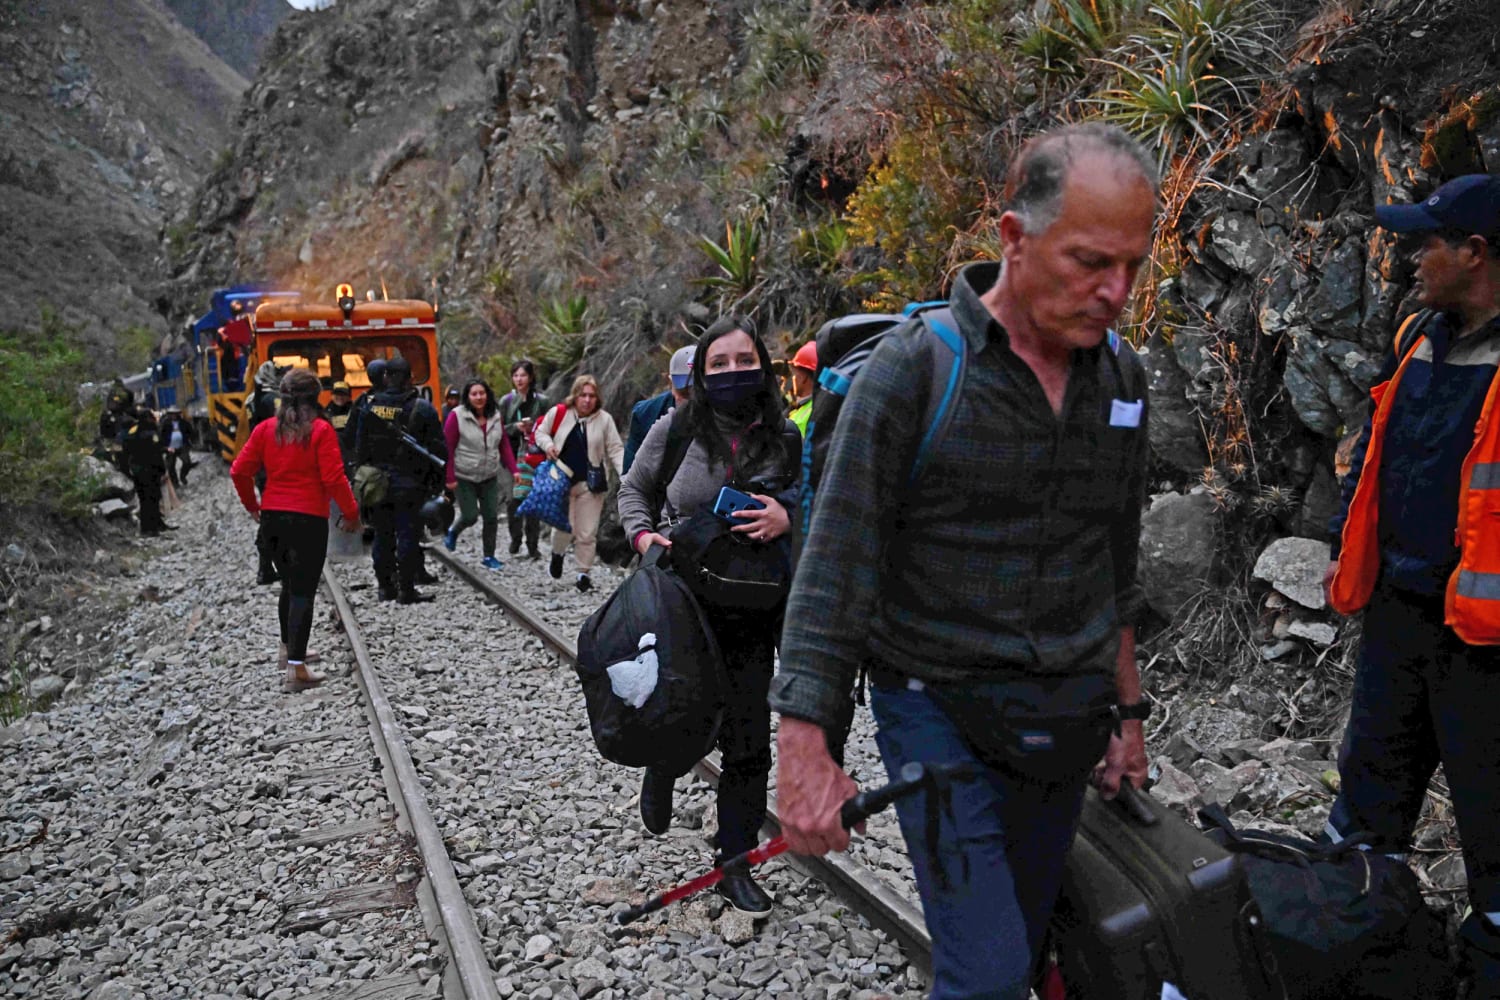 American tourists stranded in Machu Picchu as deadly unrest sweeps Peru